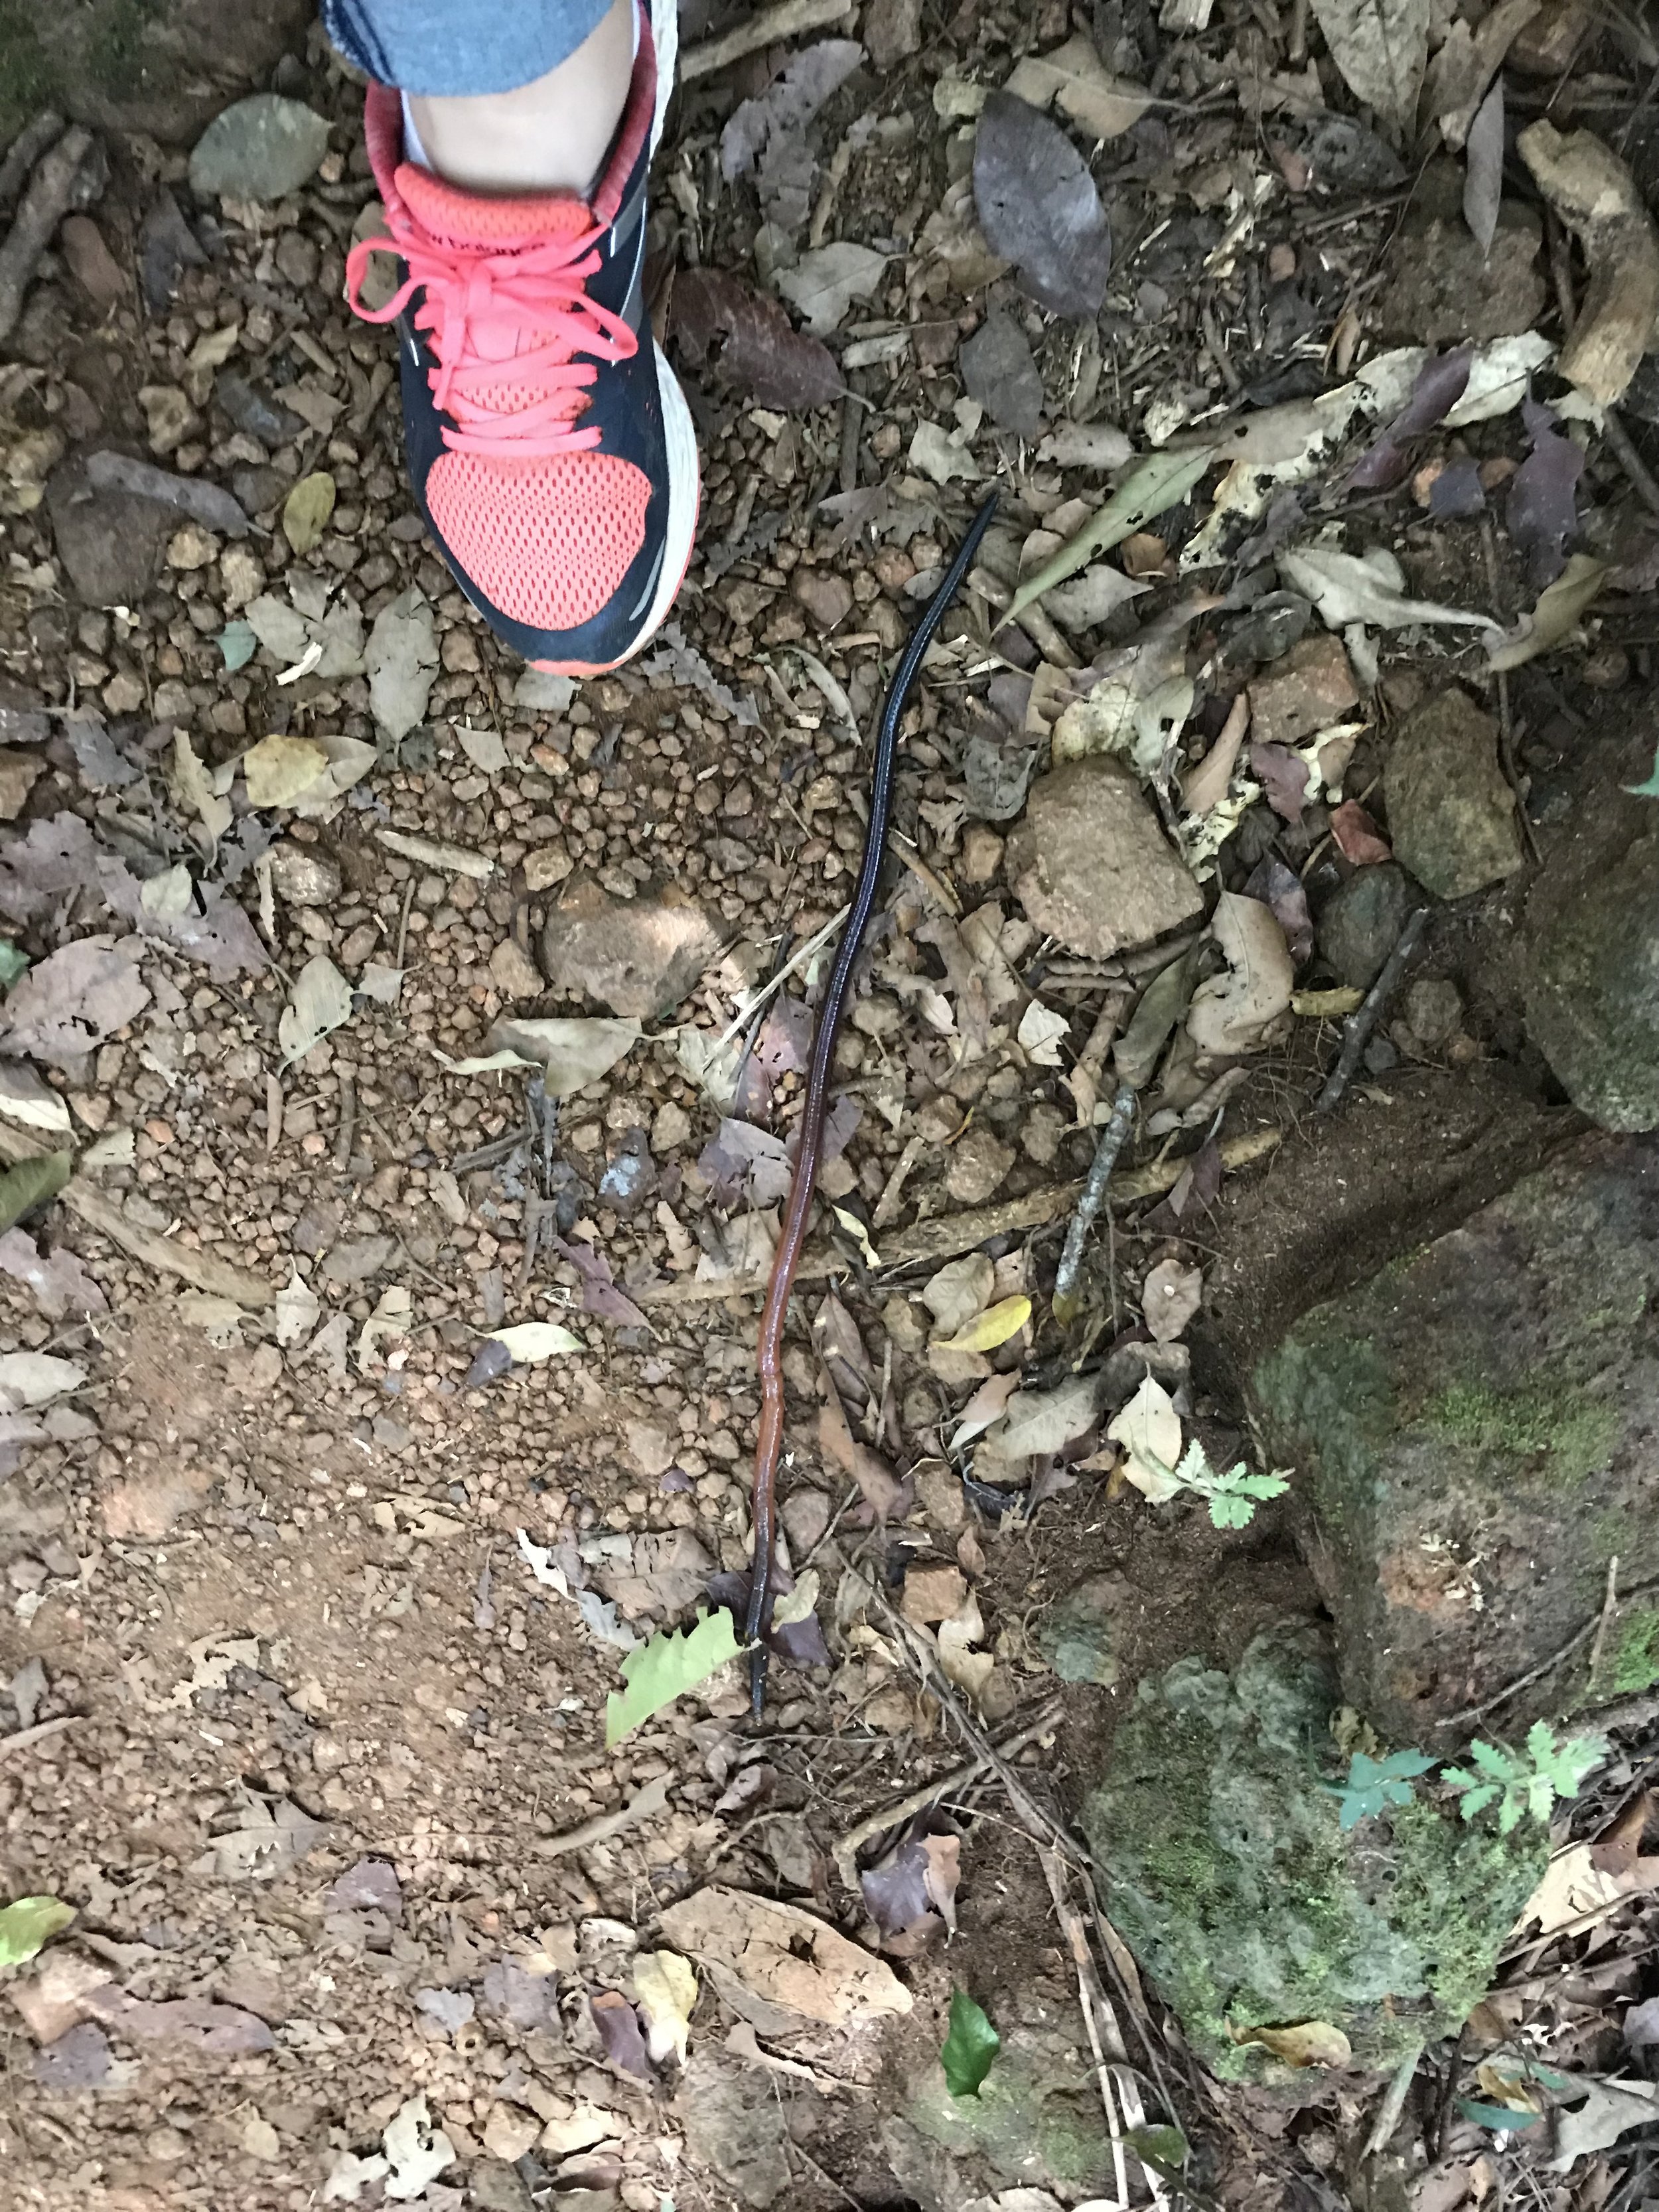  We encountered a worm on our way back at the rescue. &nbsp;Probably two feet long. 